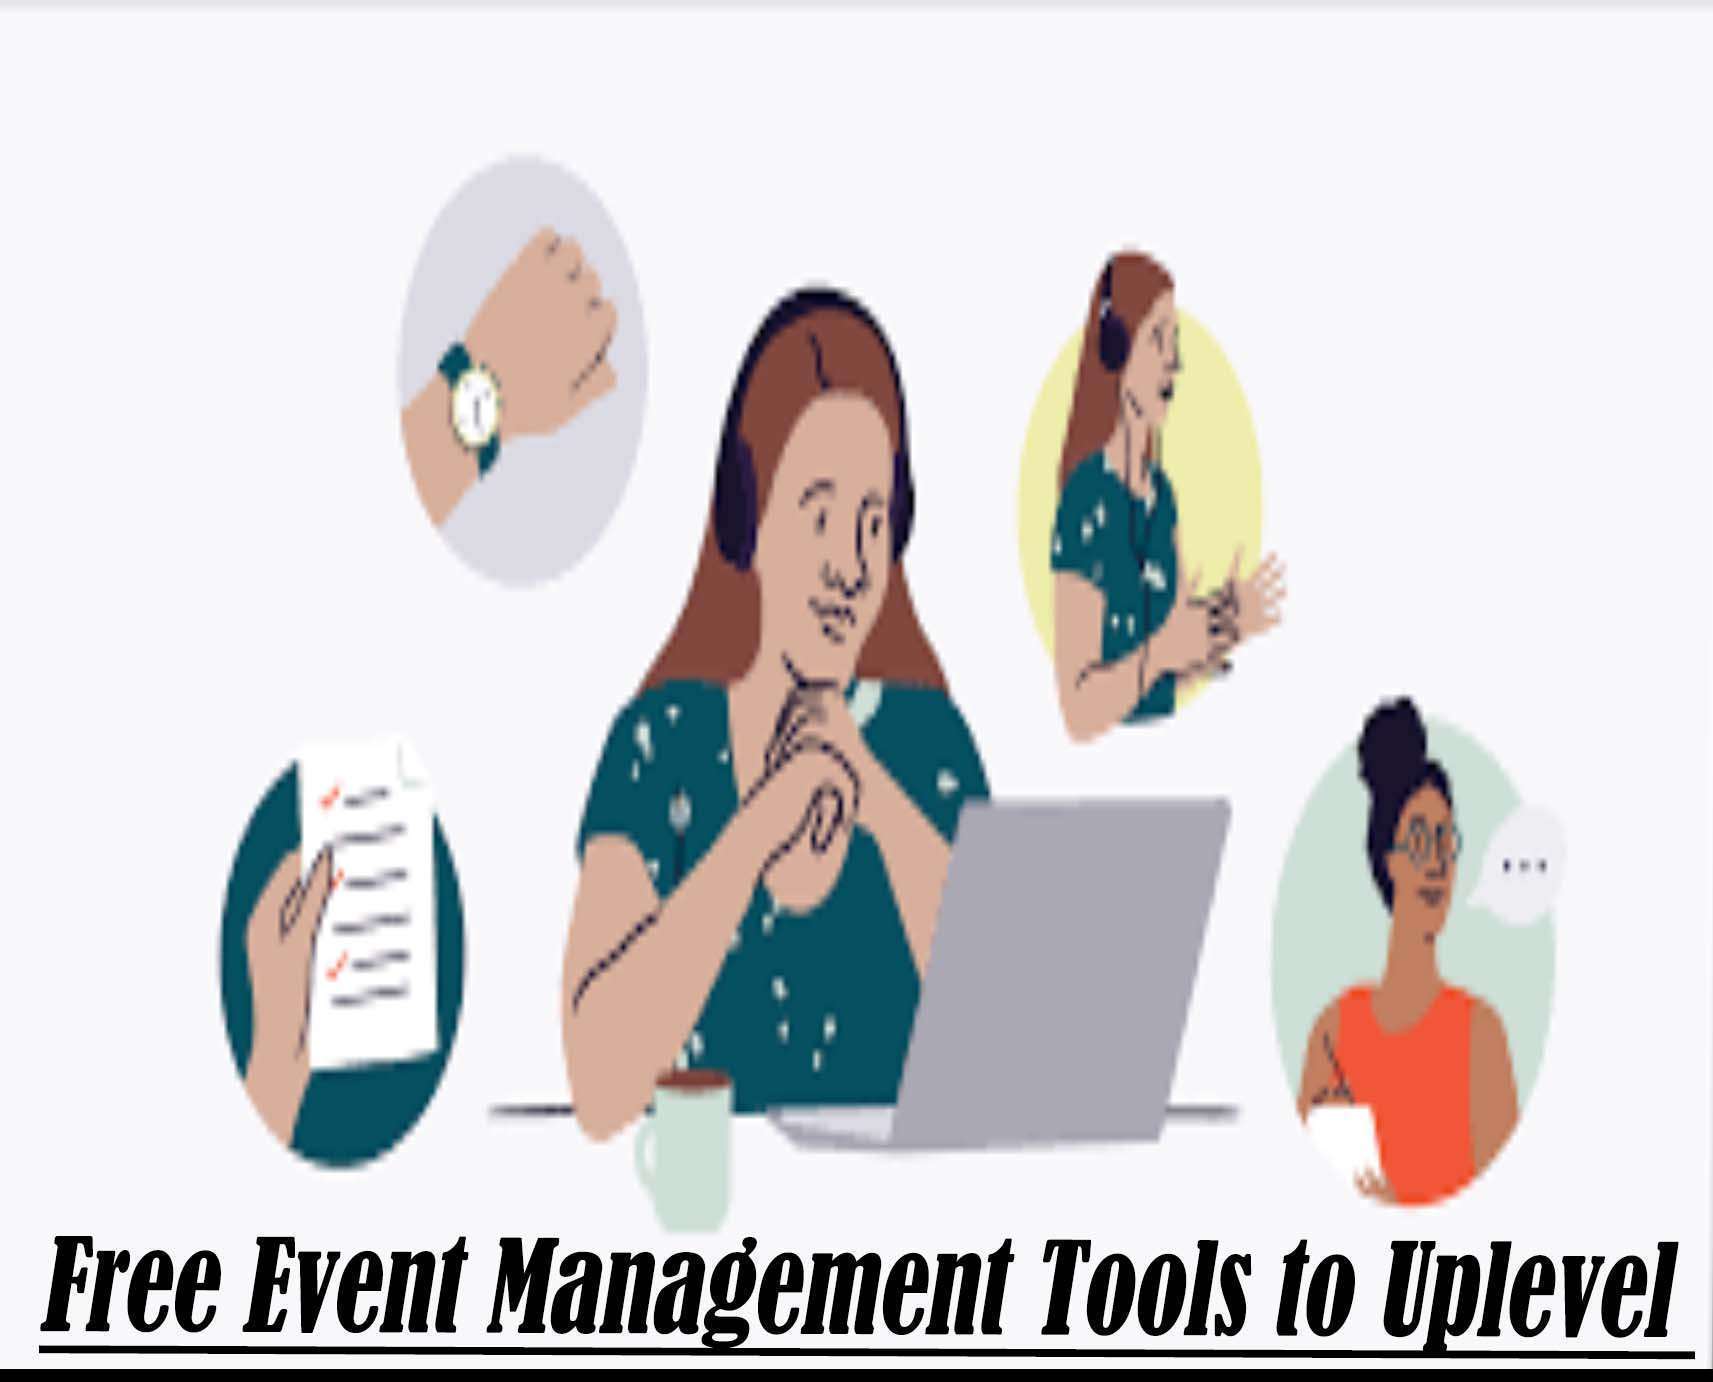 Free Event Management Tools to Uplevel Your Business